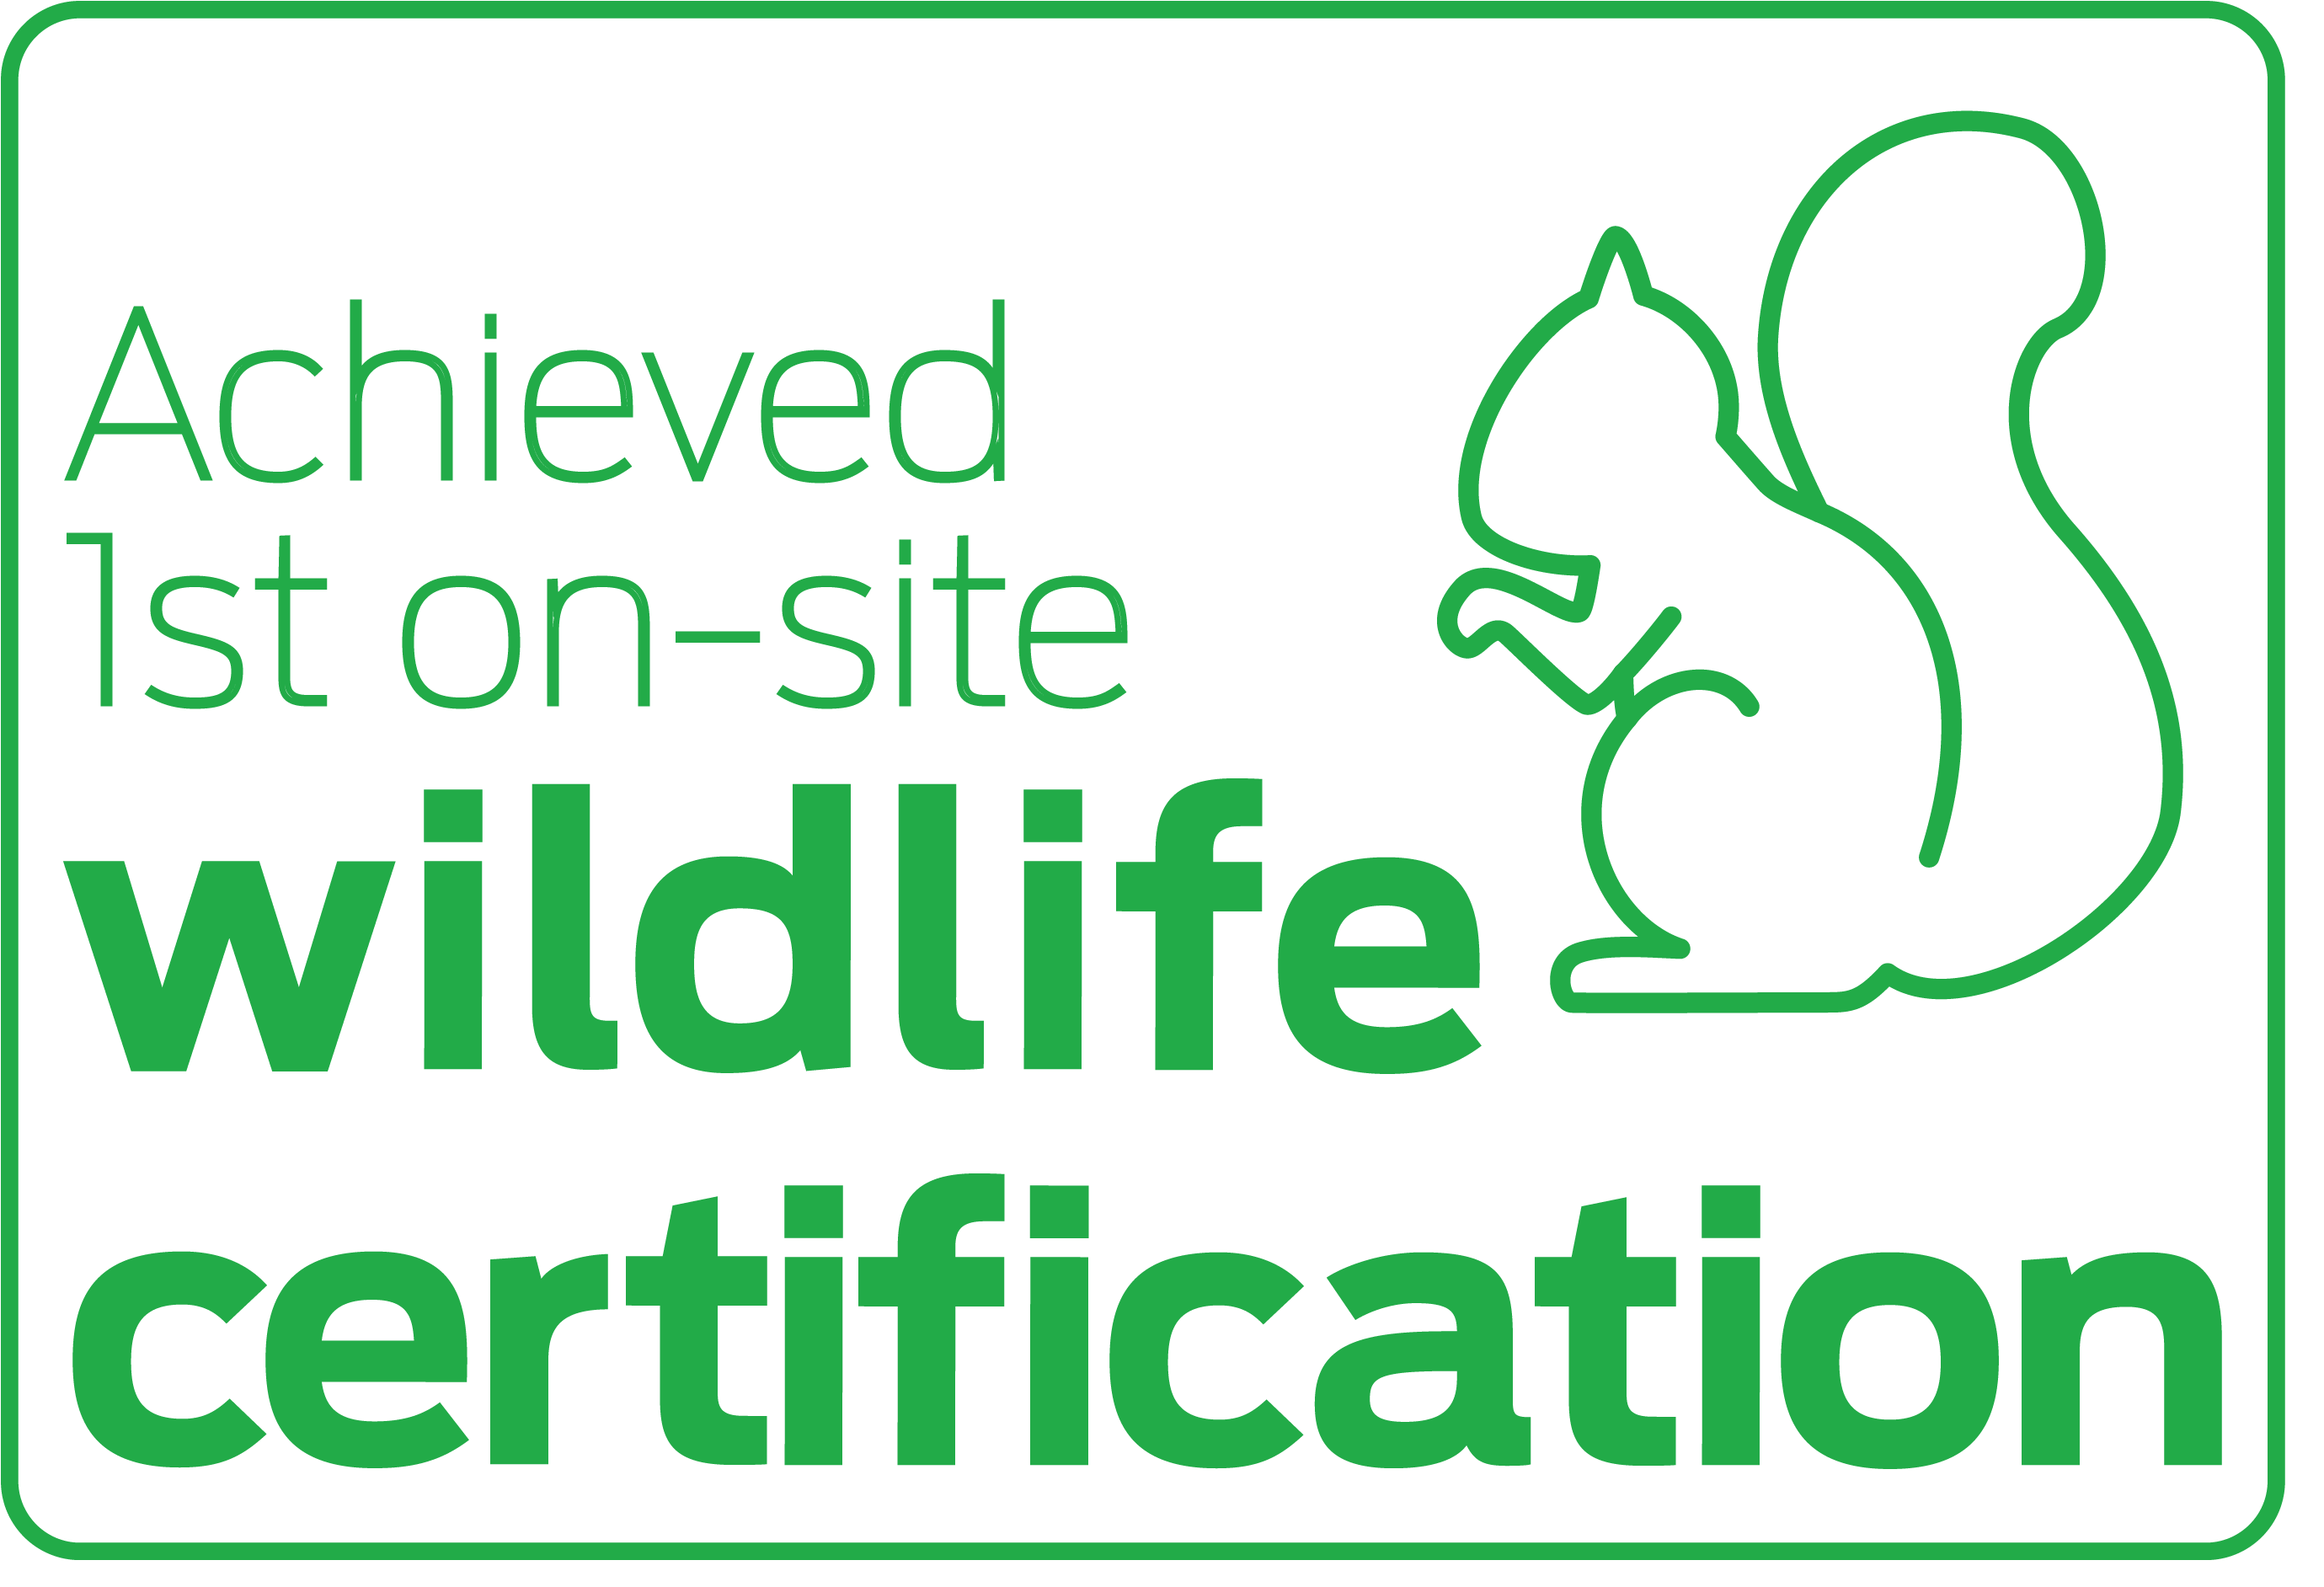 Achieved 1st on-site wildlife certification